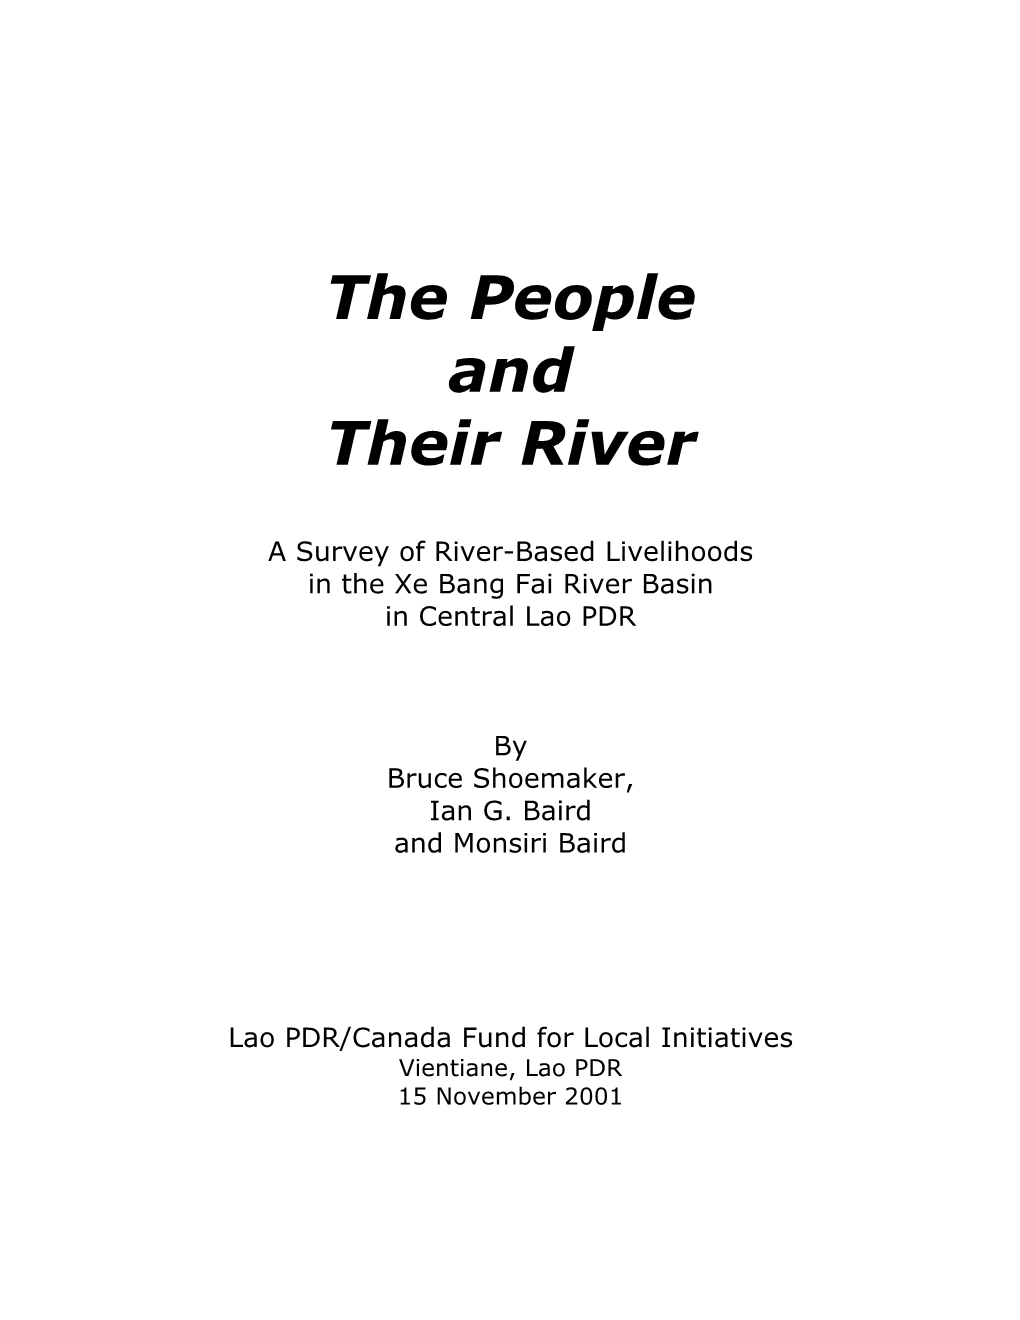 The People and Their River